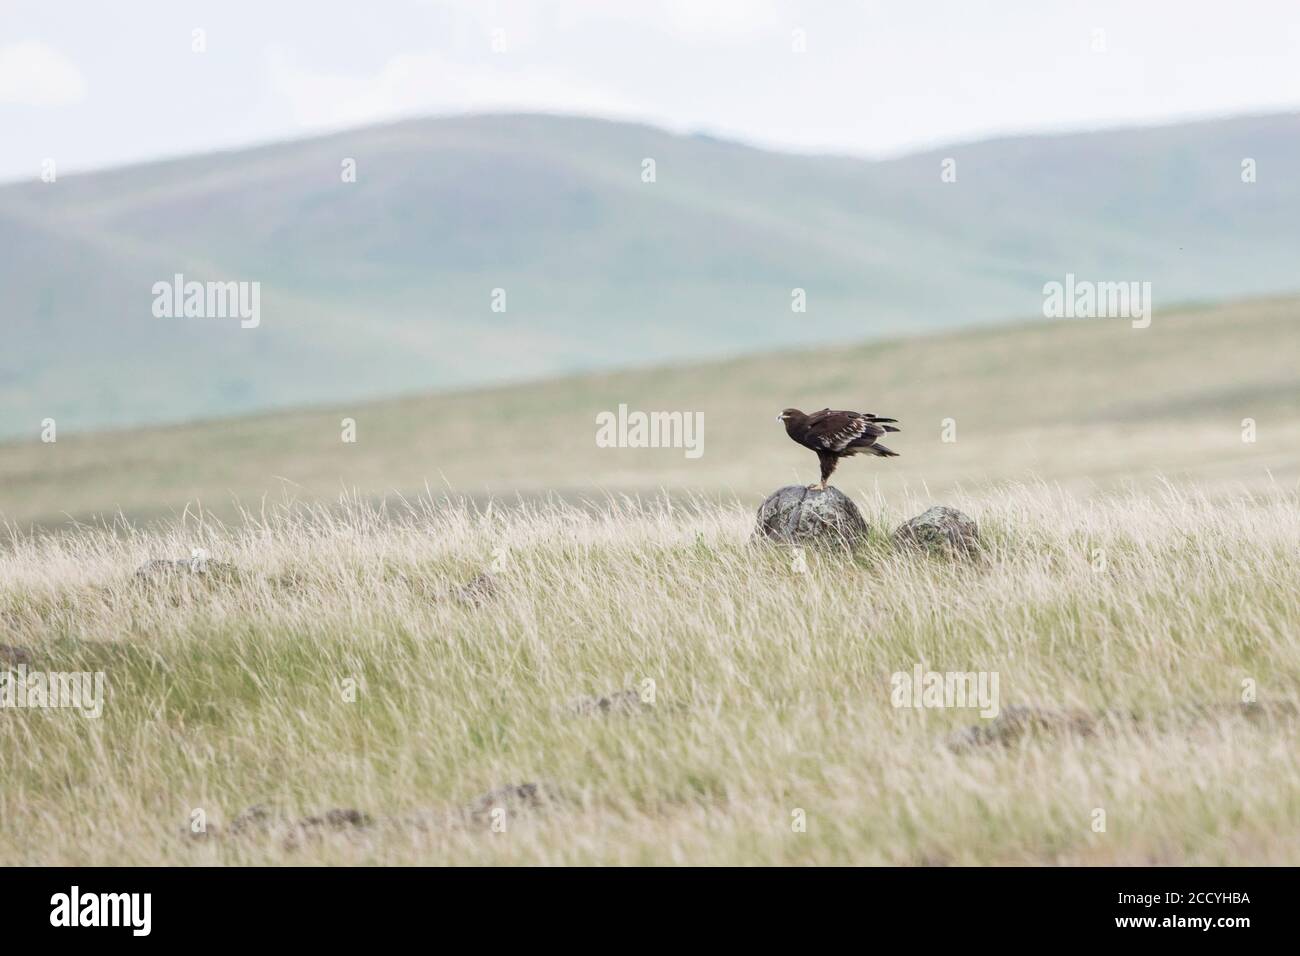 Second year Greater Spotted Eagle (Aquila clanga) in grassland steppes of Russia around lake Baikal. Stock Photo